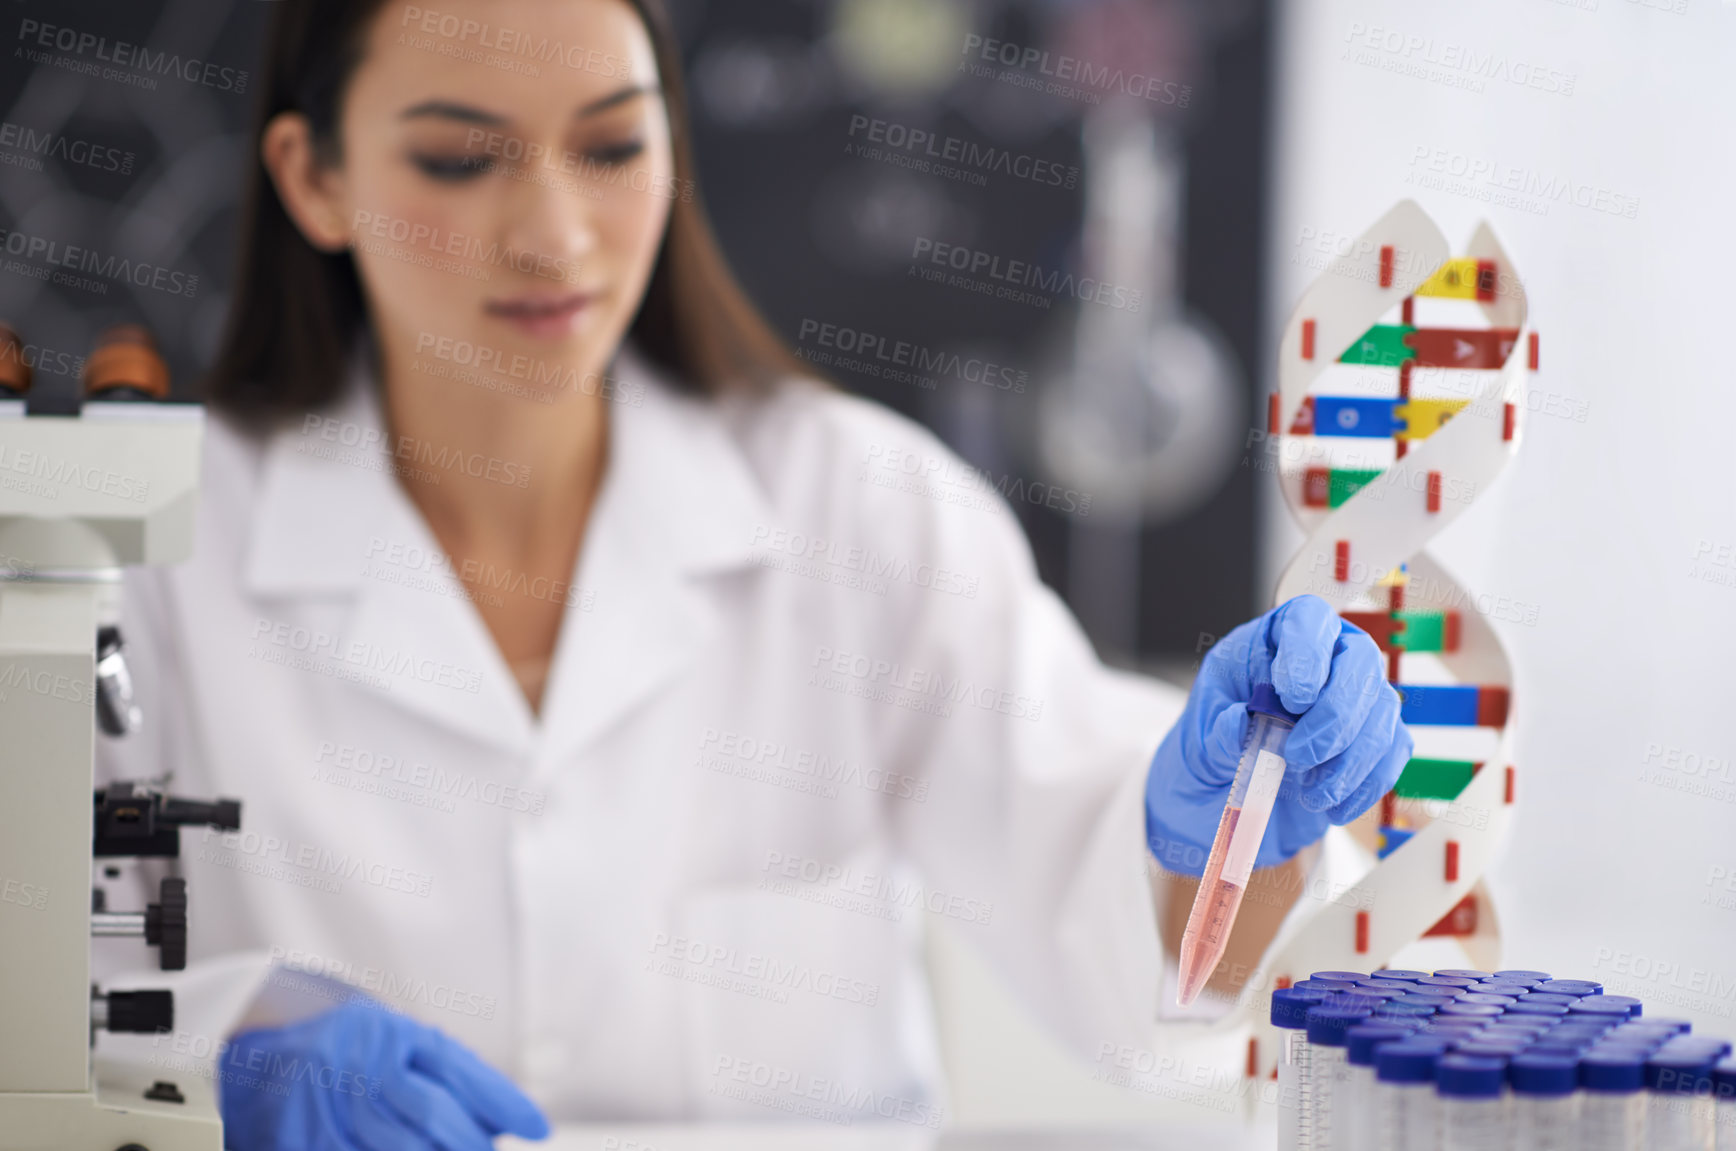 Buy stock photo Shot of a female scientist observing a sample in a test tube